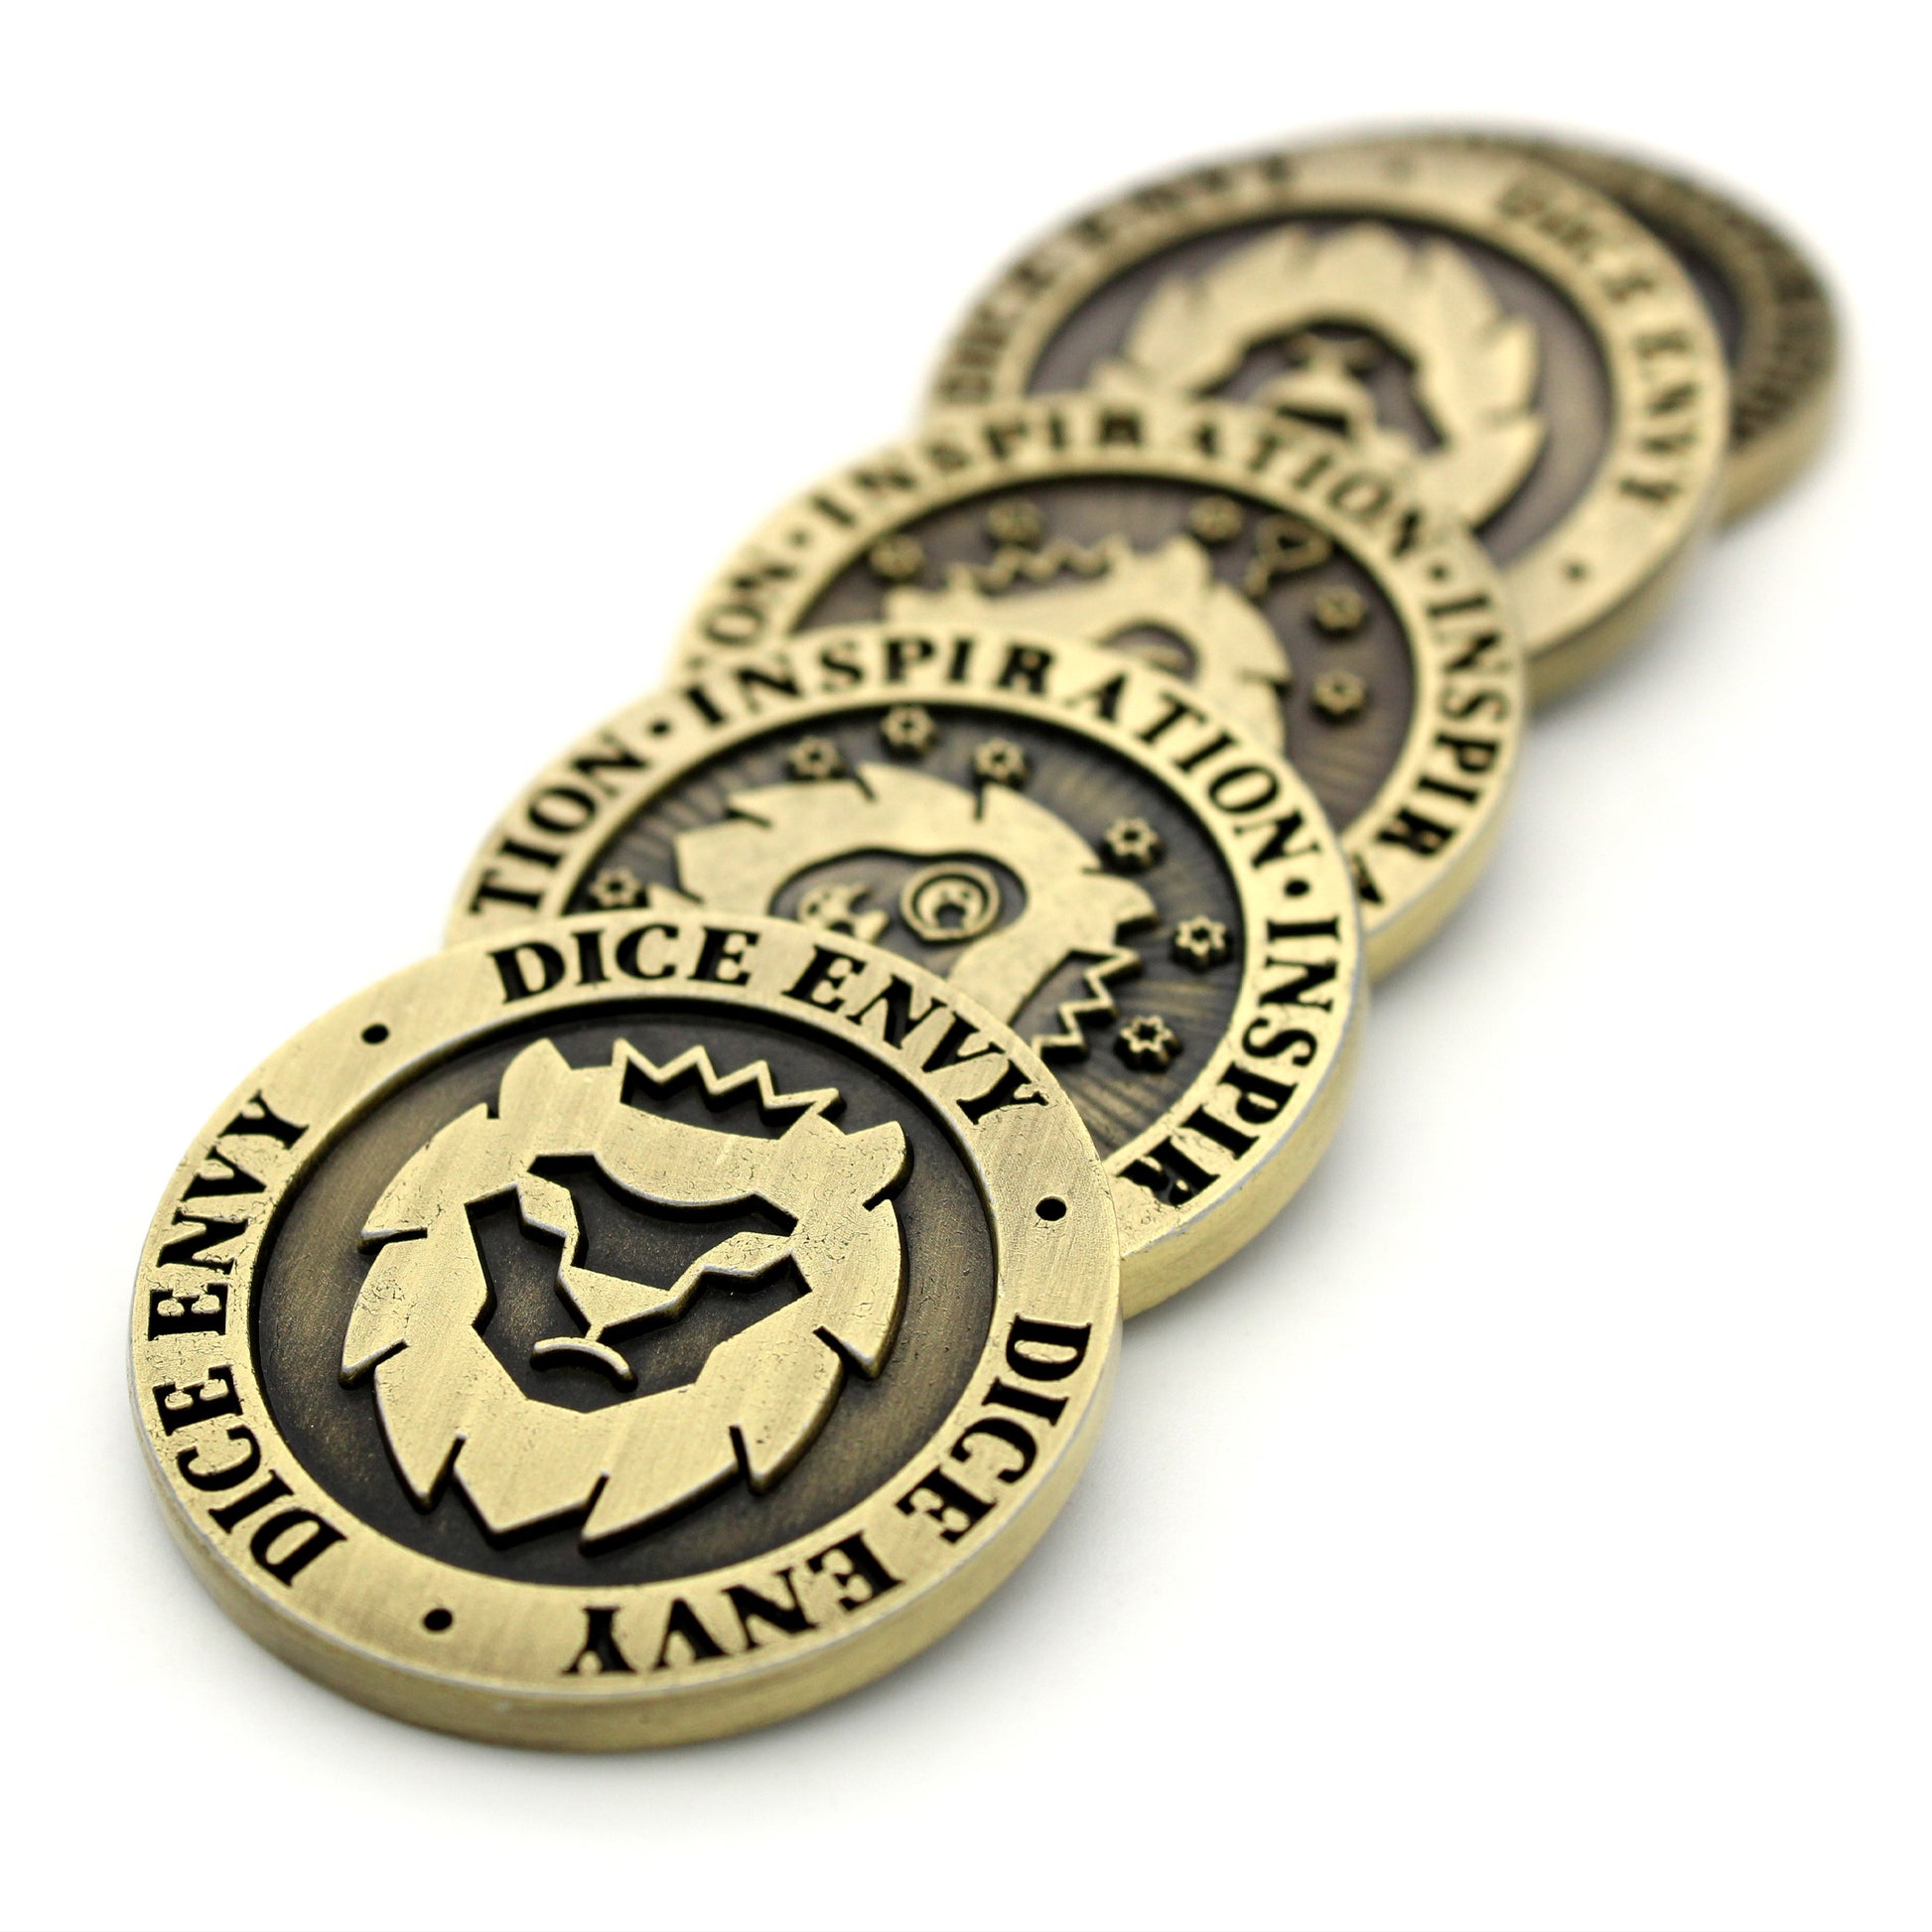 Inspiration Coins are a set of five double-sided, ancient gold colored metal tokens each measuring 30mm in diameter.